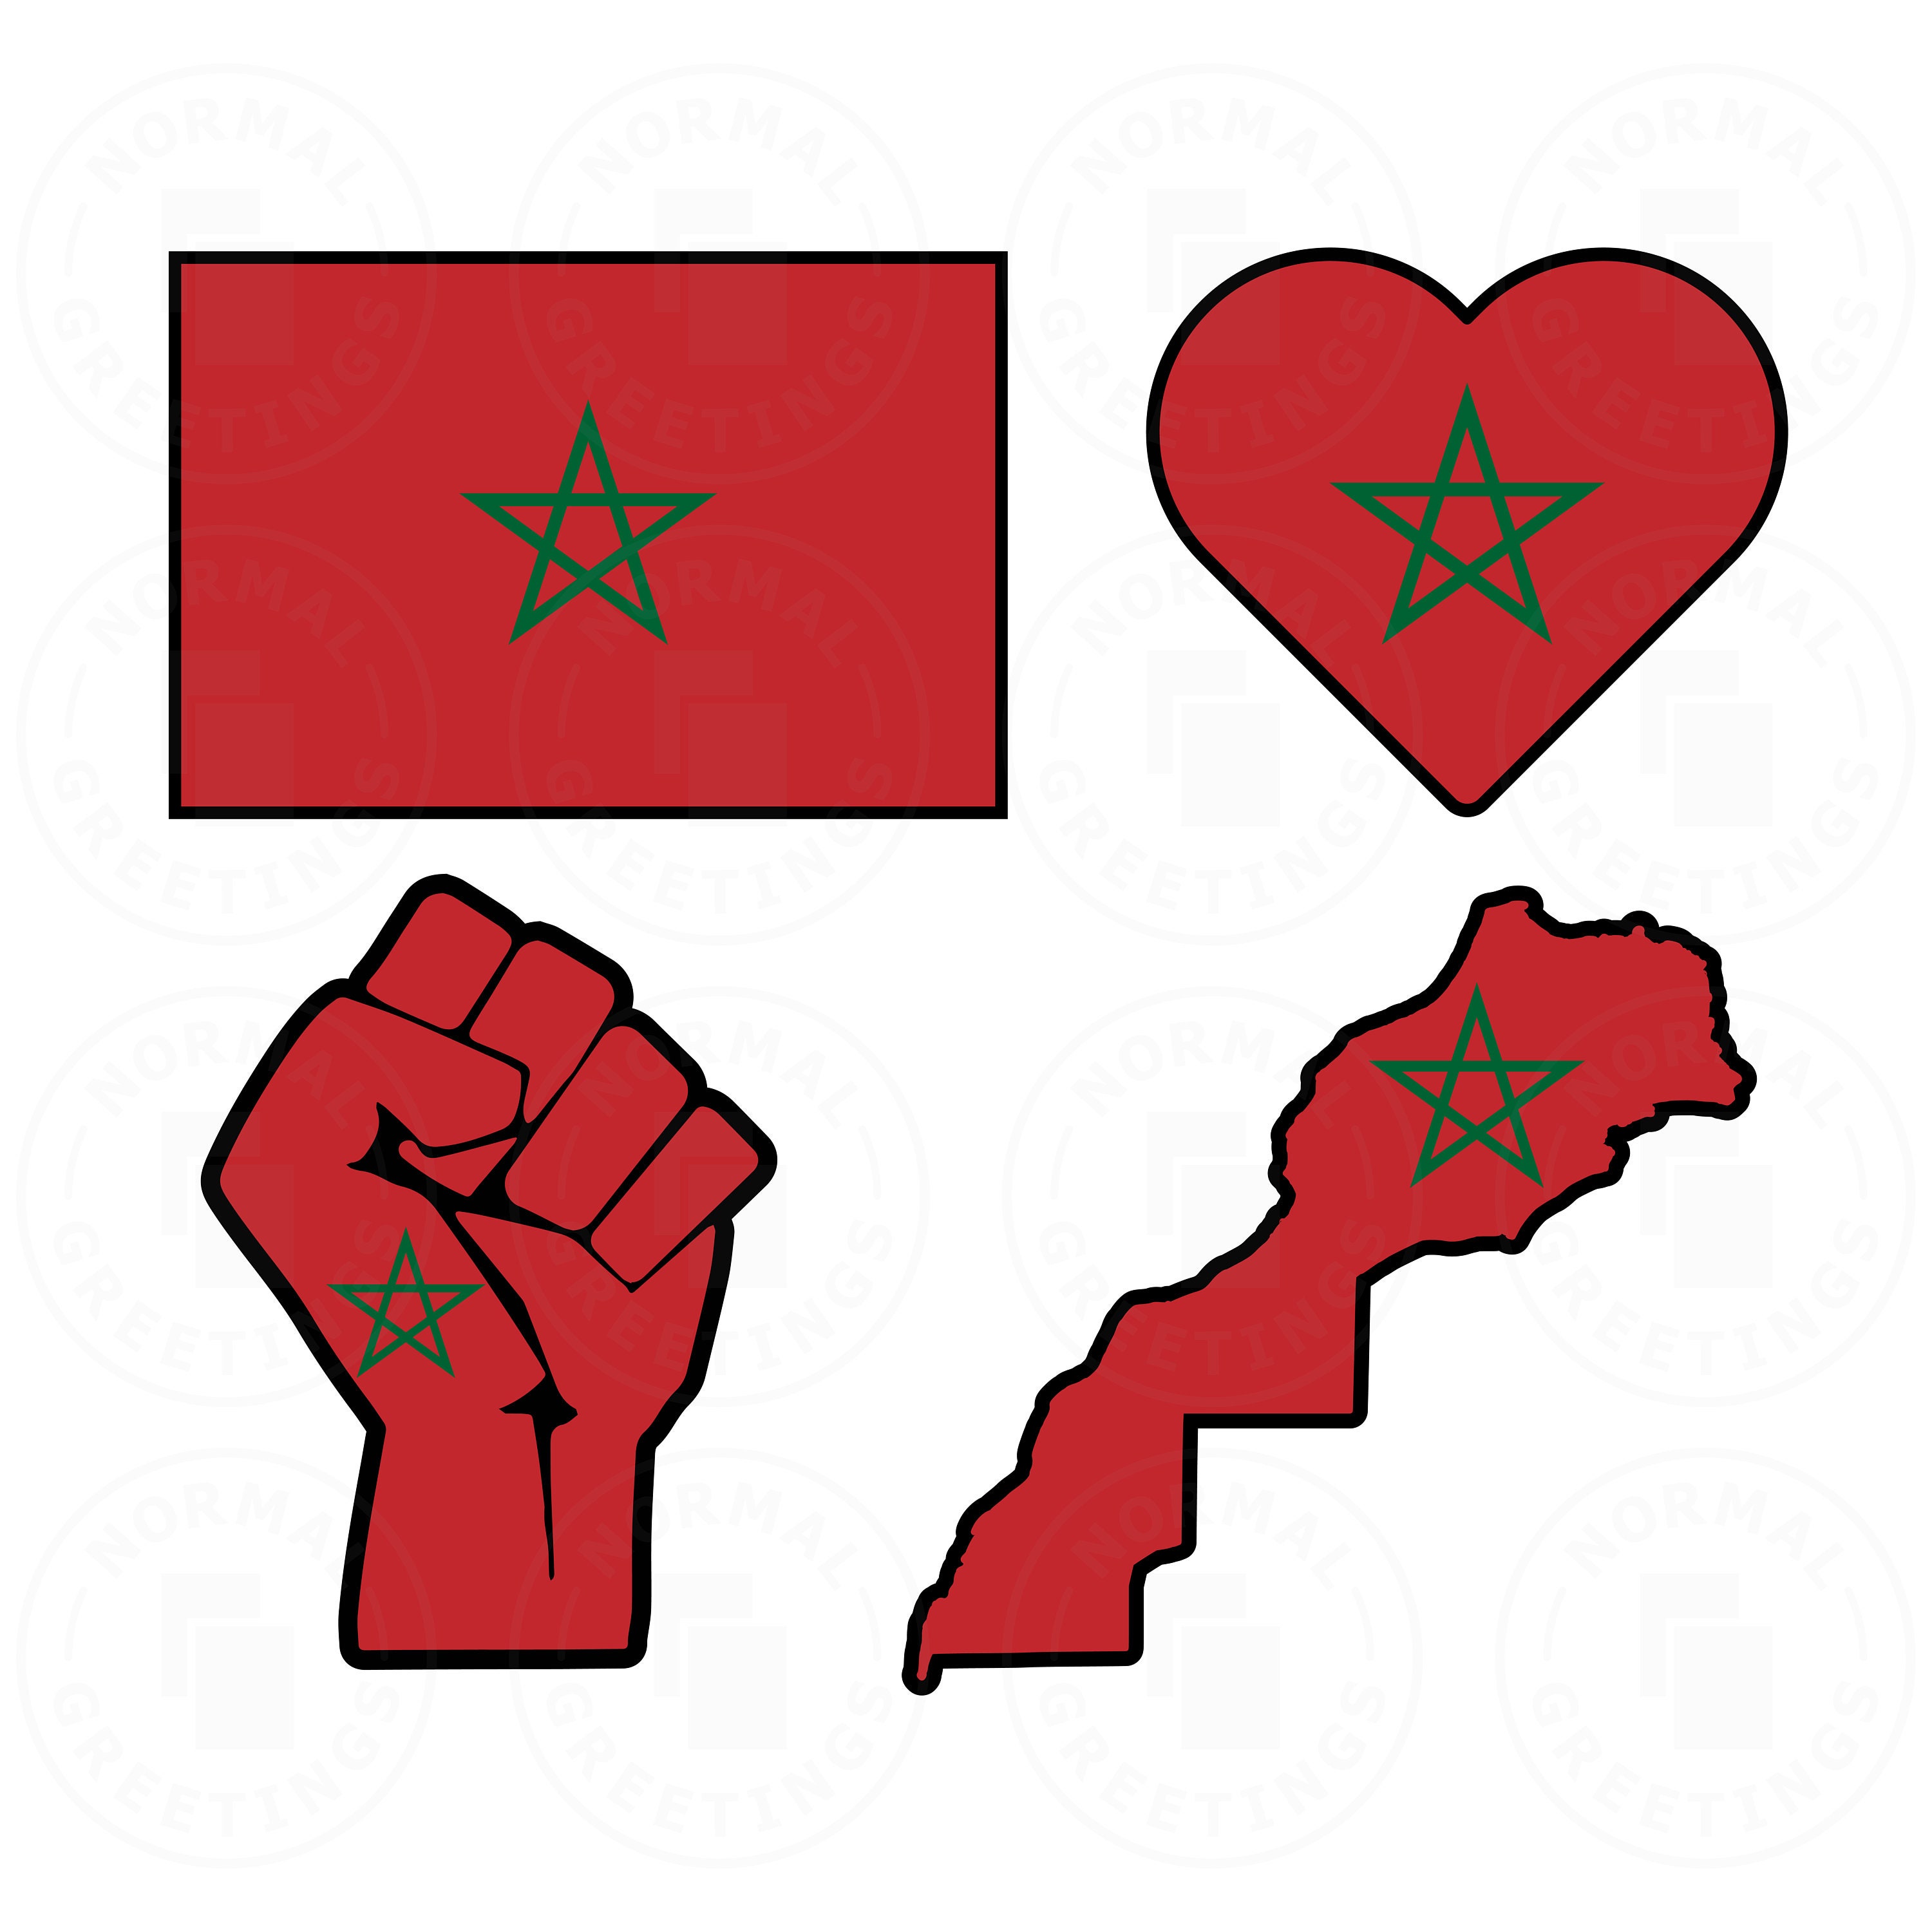 Morocco map cross stitch pattern with a heart for Rabat